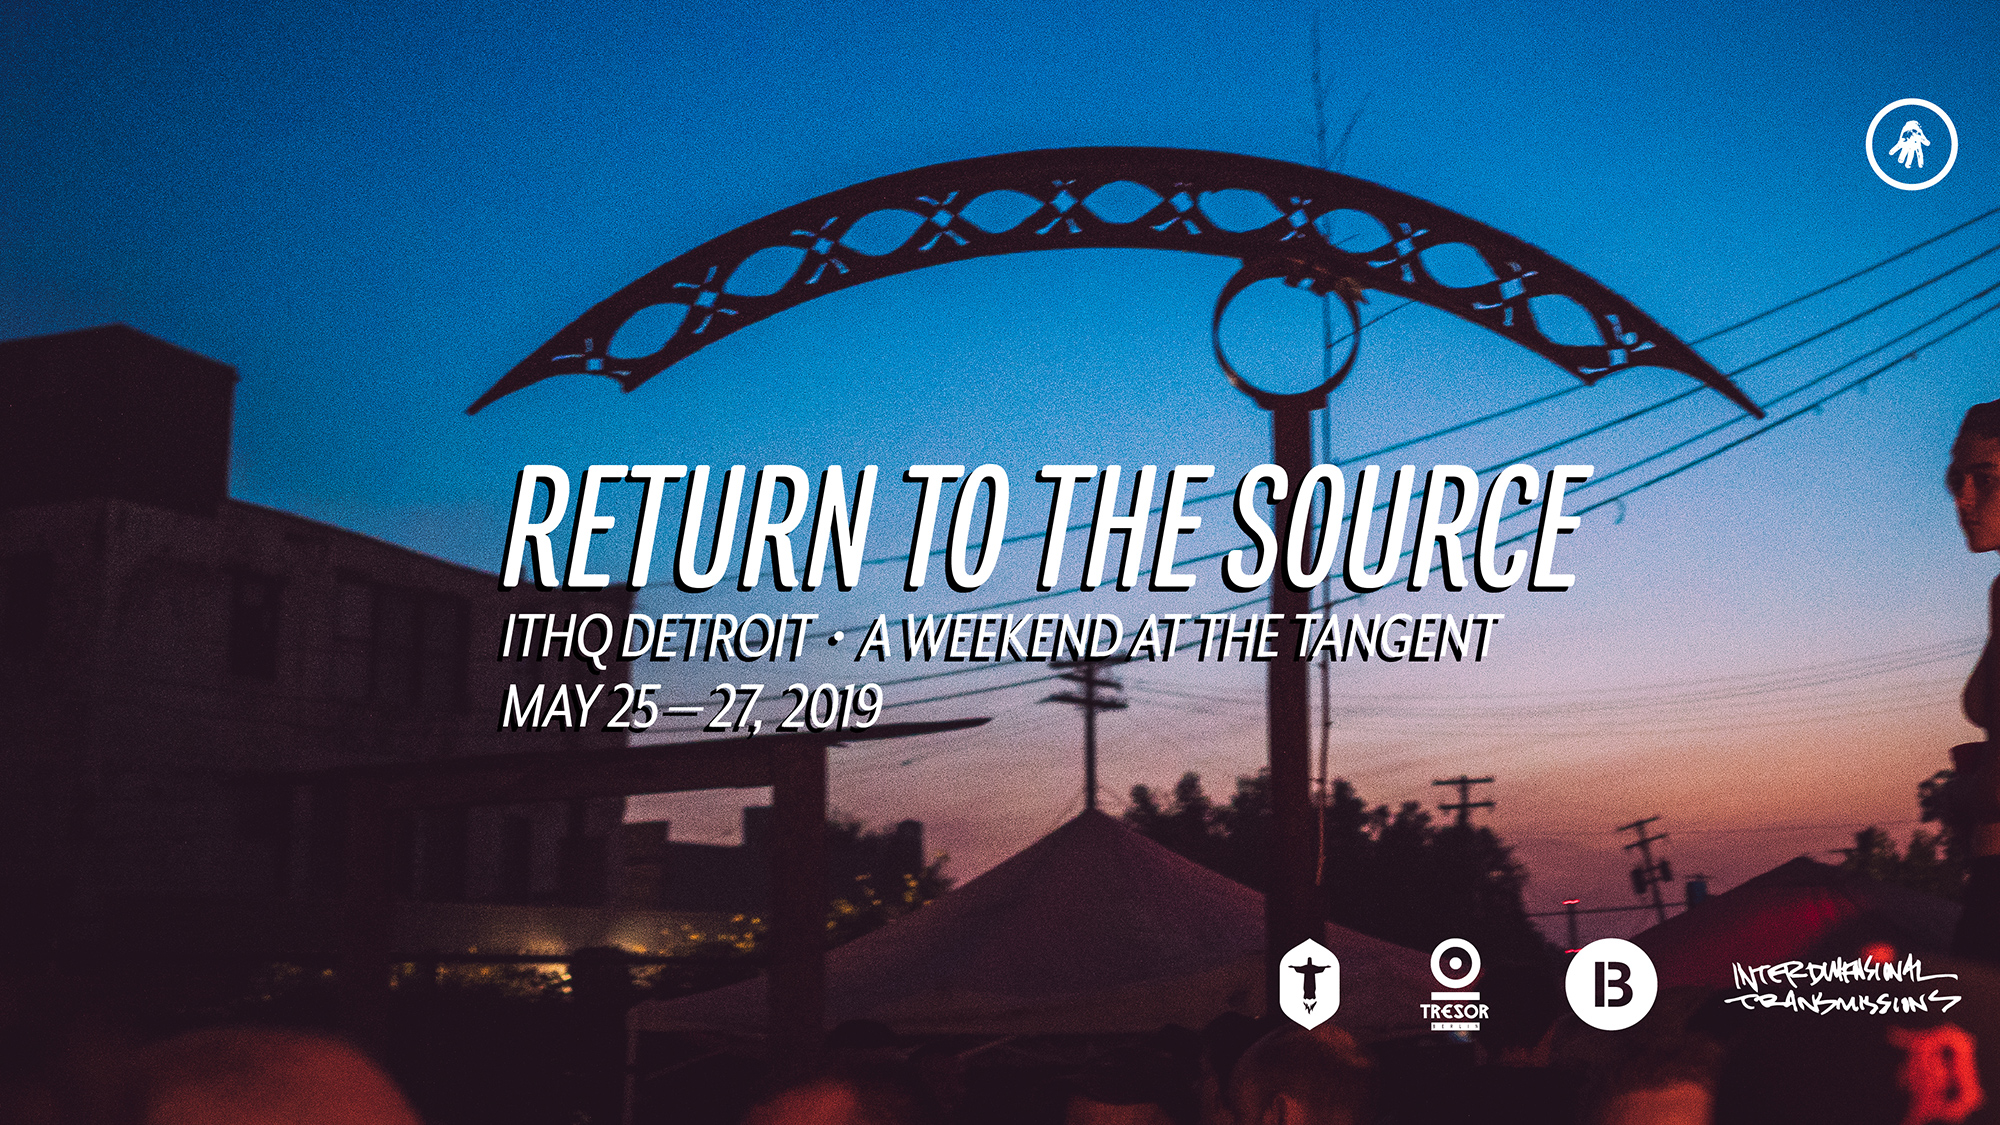 Return to the Source: May 25-27, 2019